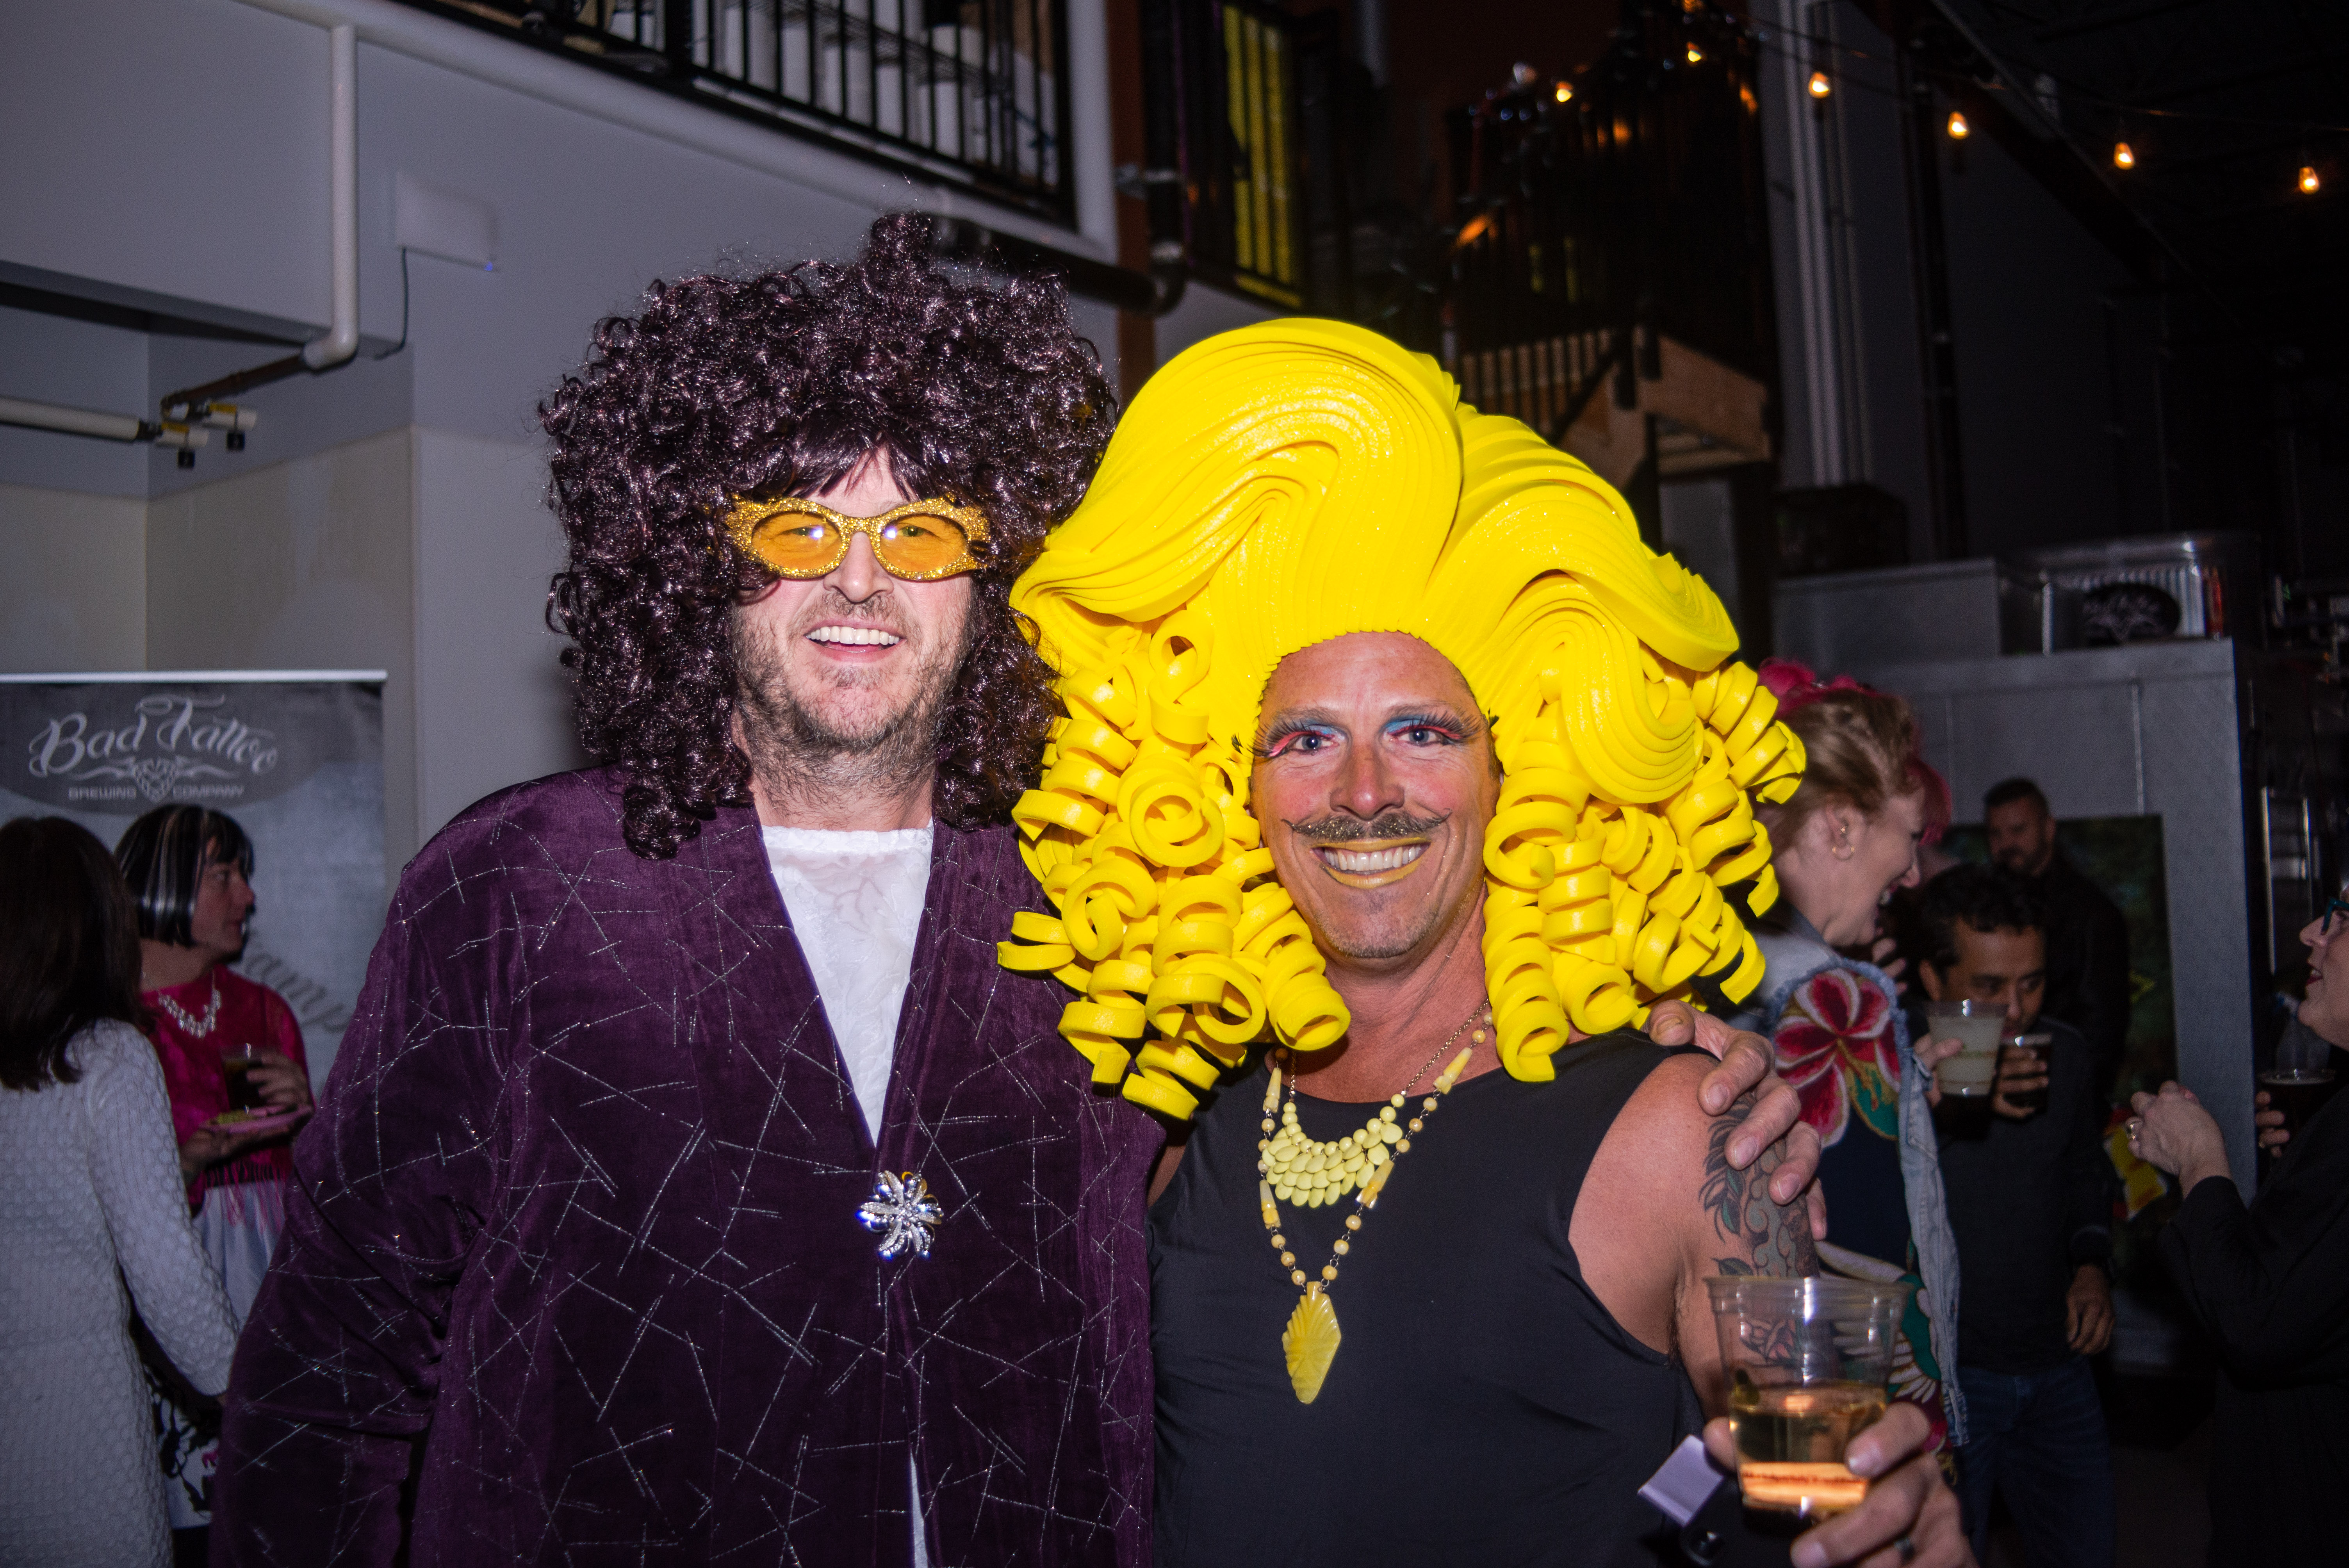 Two men wearing vibrant dress including large wigs at a drag performance